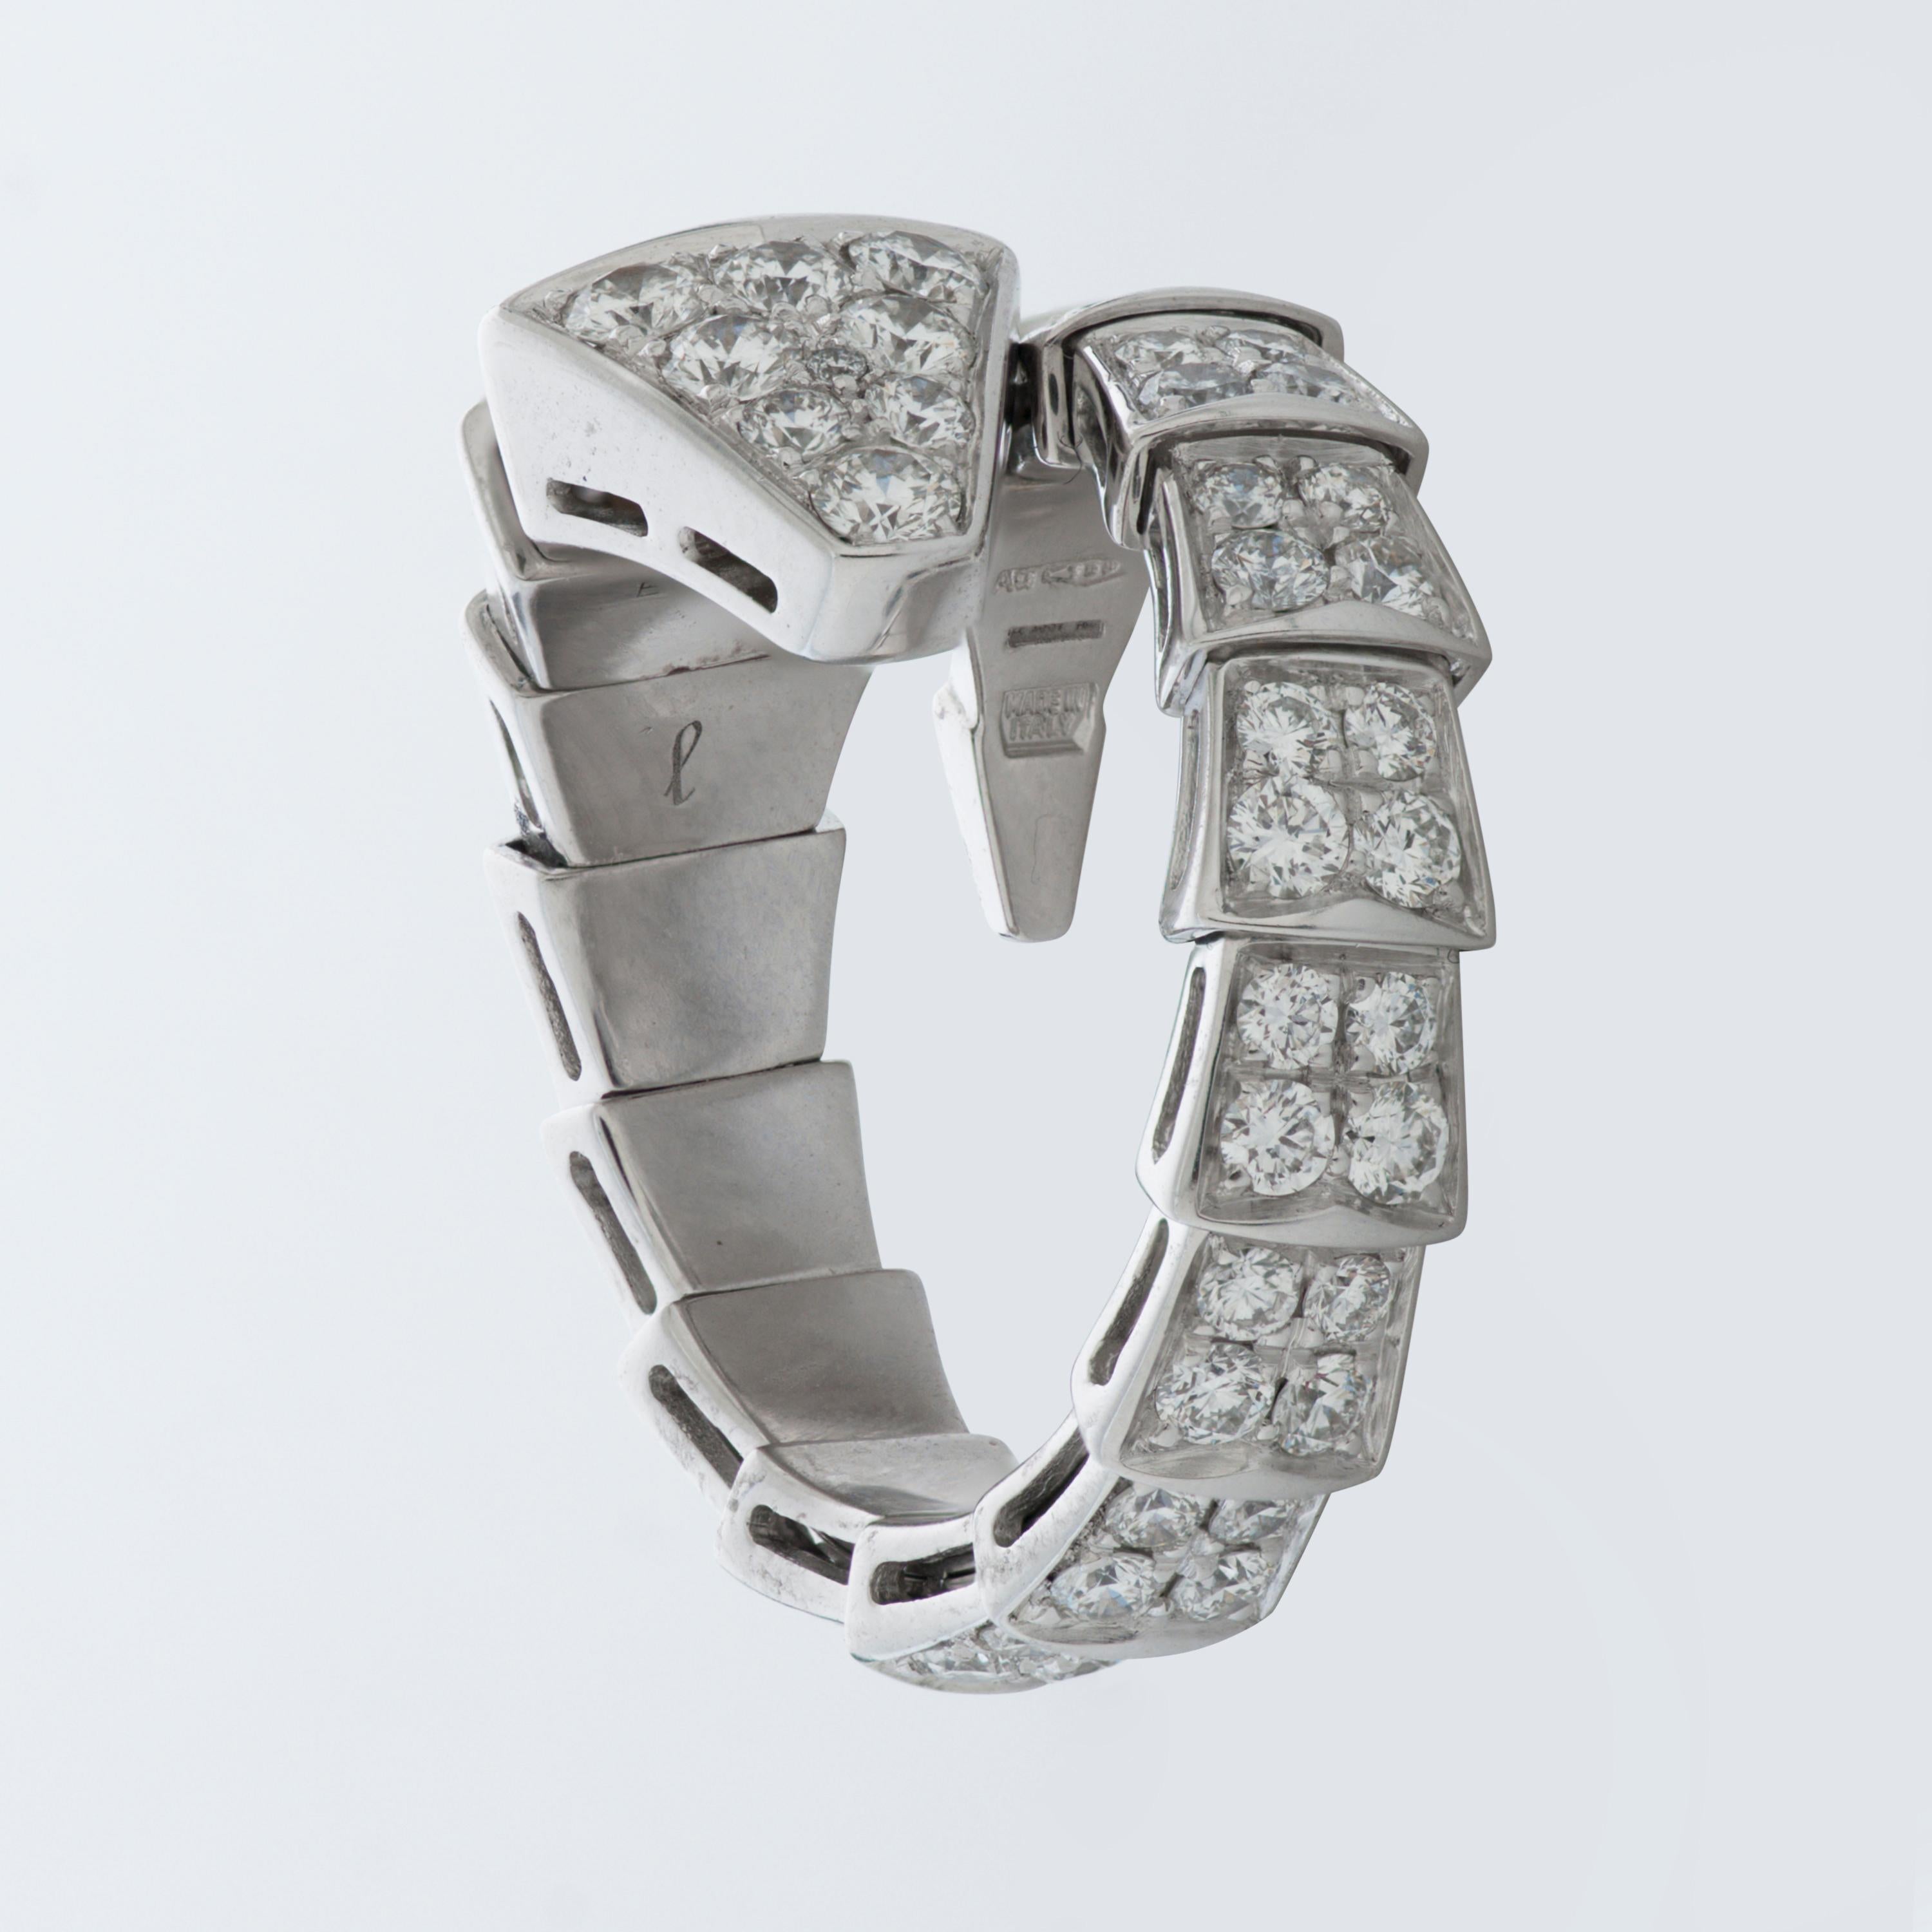 This Bulgari ring from the Serpenti Viper collection features approximately 1.74 carat of round brilliant cut diamonds pave set in 18k white gold. 

Size Large, flexible.  Fits sizes 7-7.75 US (54-56 EU).
Numbered and signed Bvlgari
Accompanied by